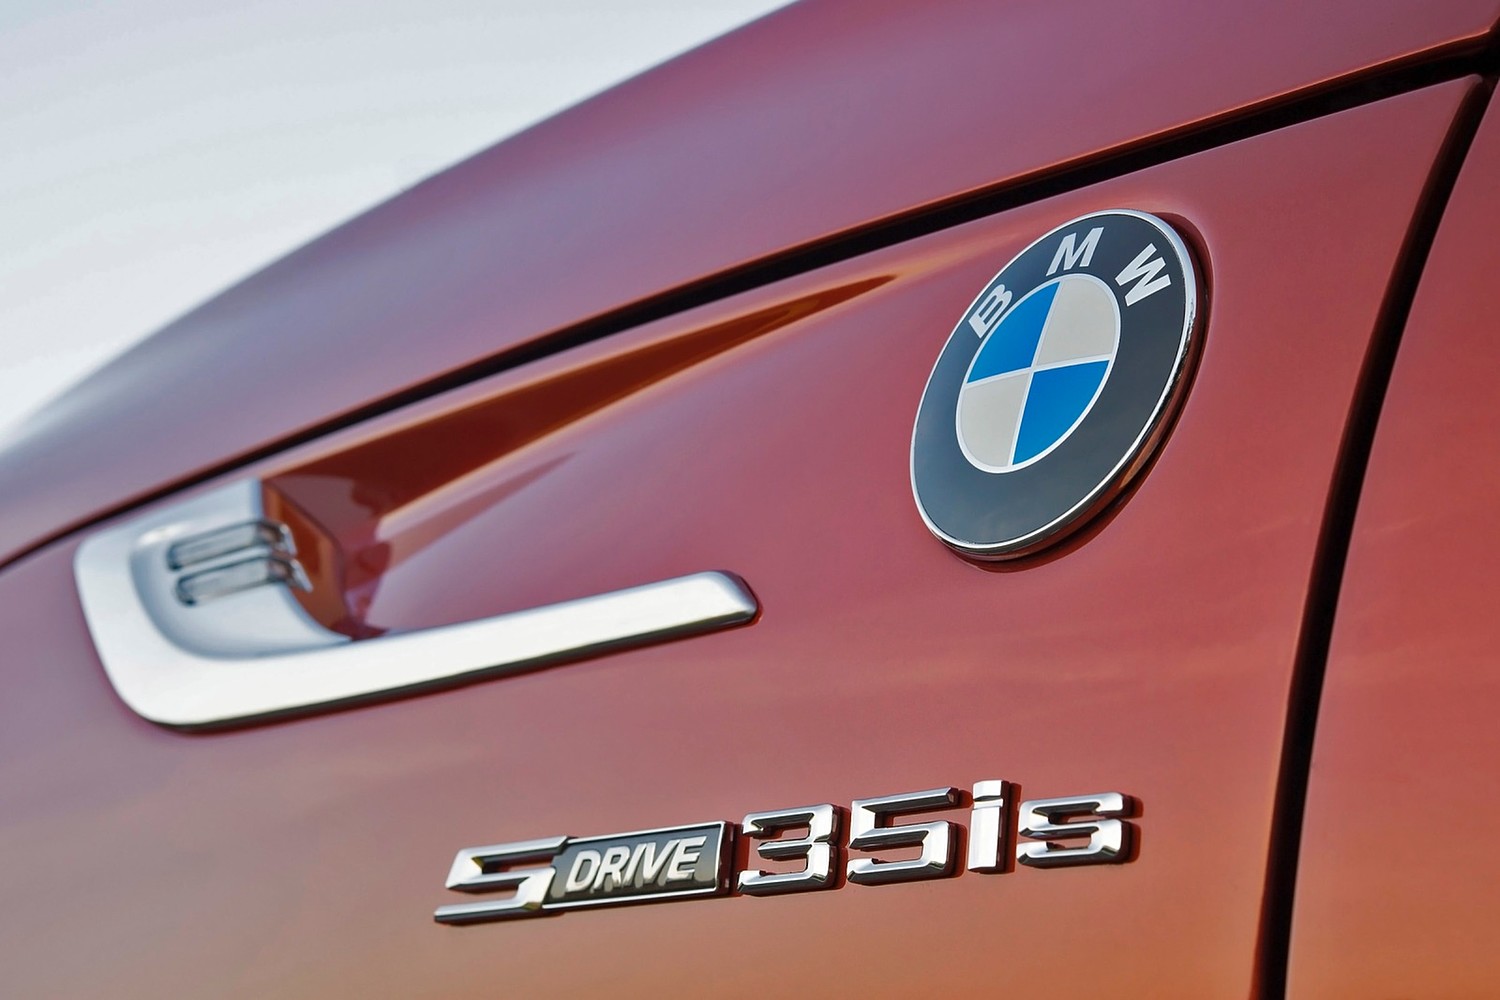 BMW Z4 sDrive35is Convertible Front Badge (2014 model year shown)